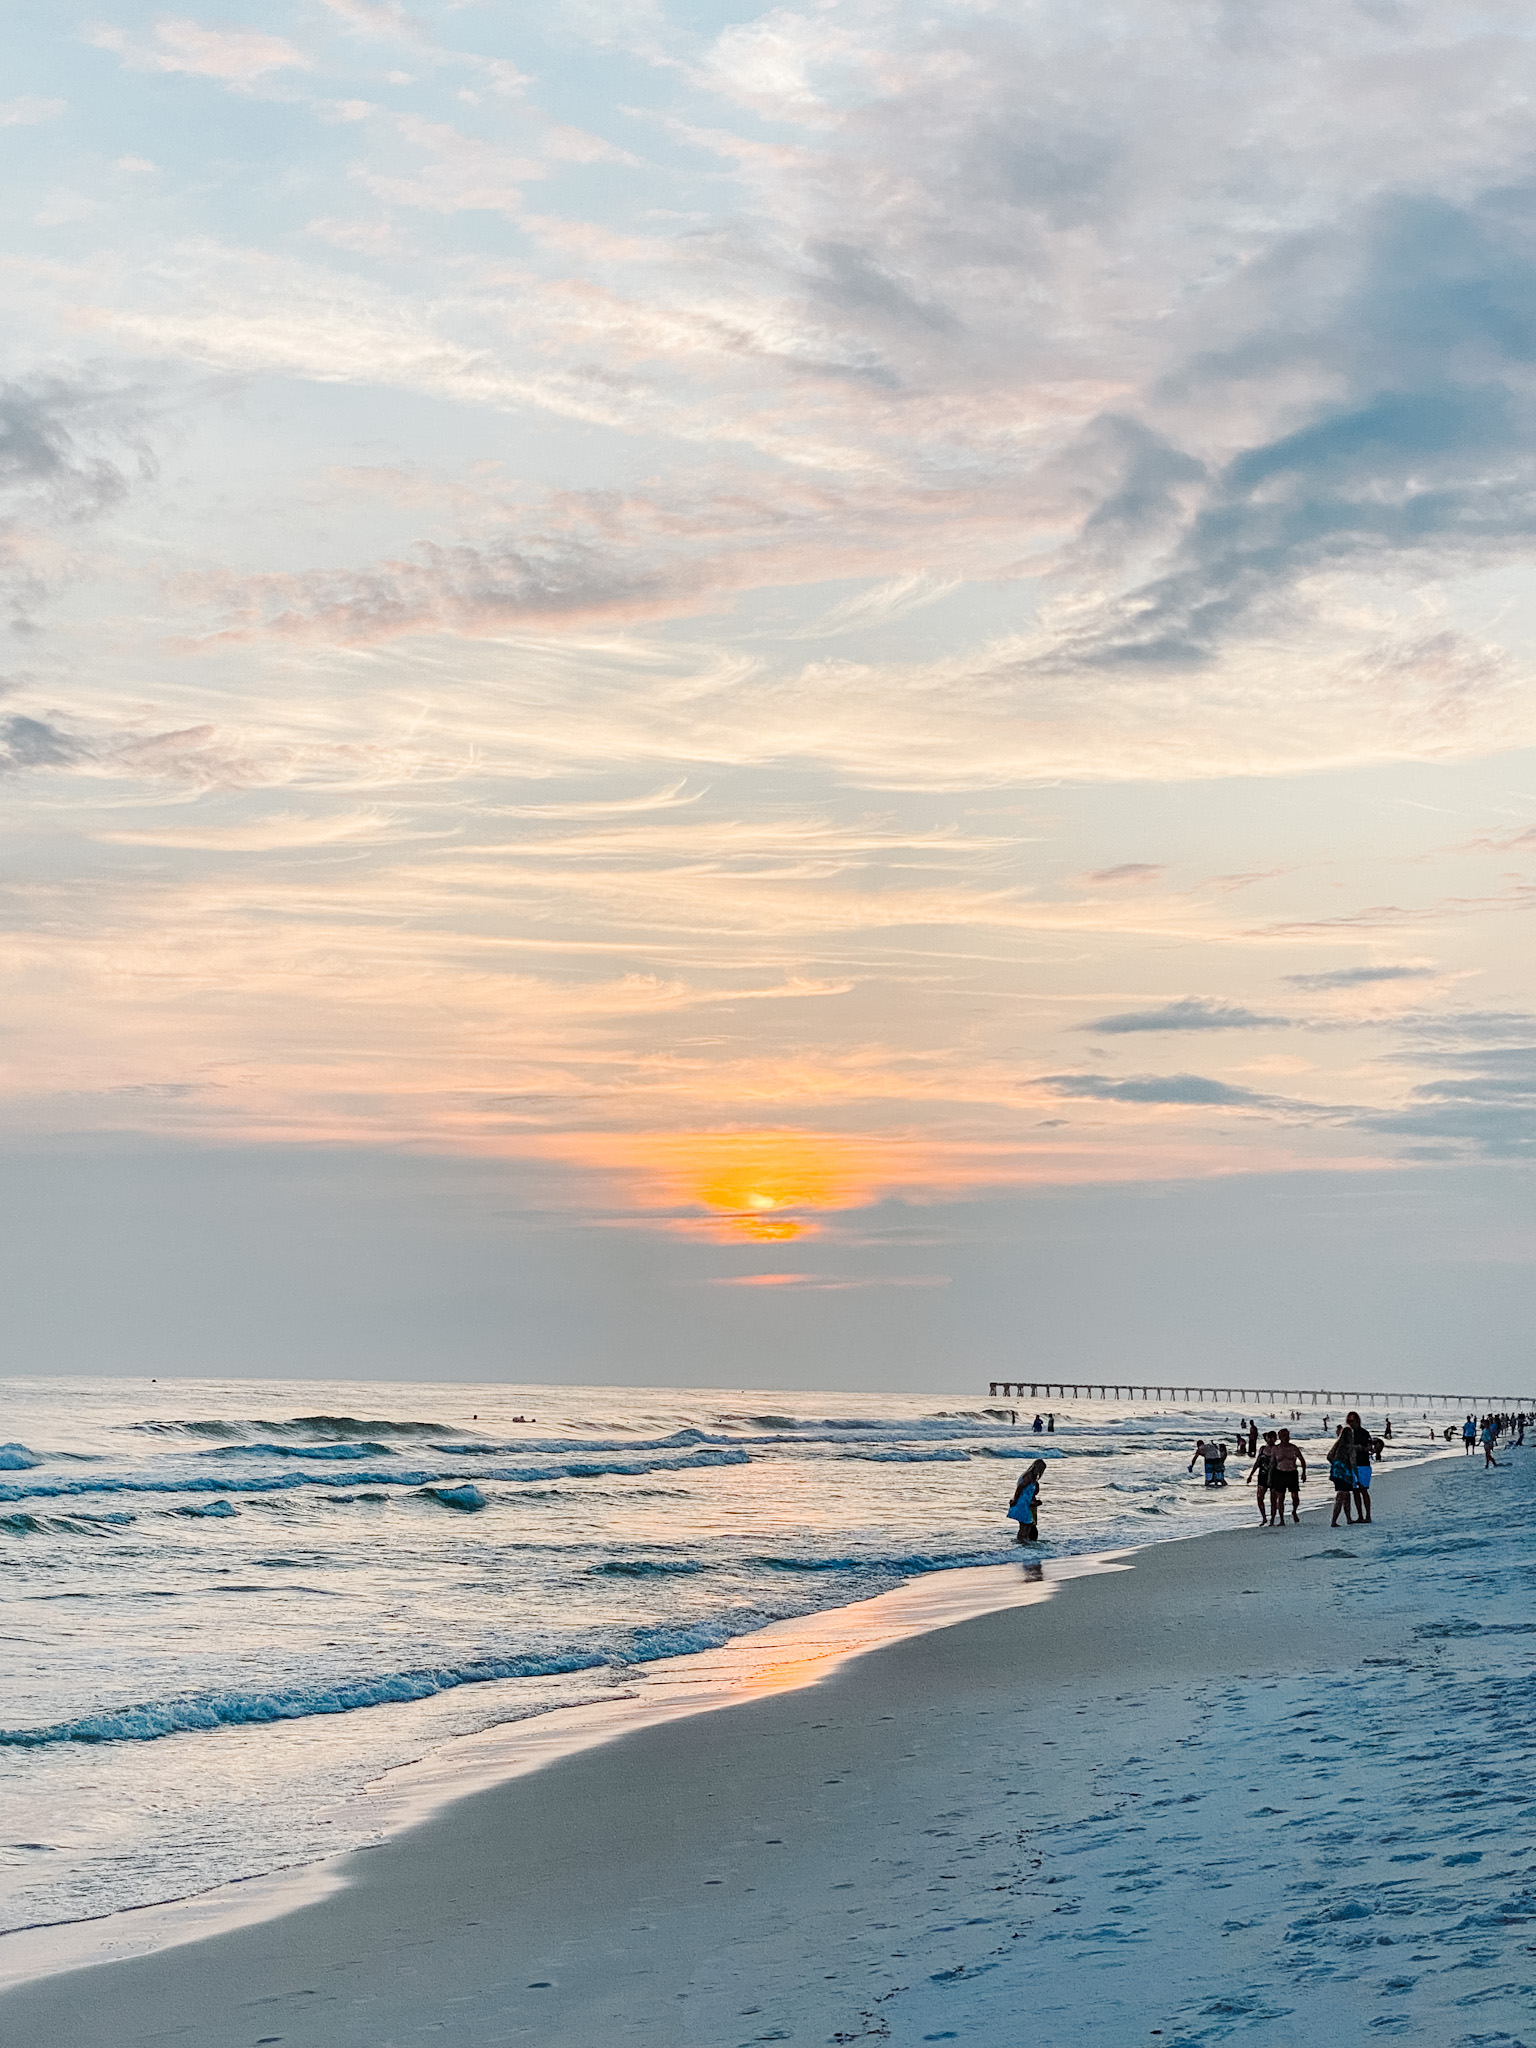 Panama City Beach Attractions by popular Memphis travel blog, Lone Star Looking Glass: image of Panama City Beach at sunset. 